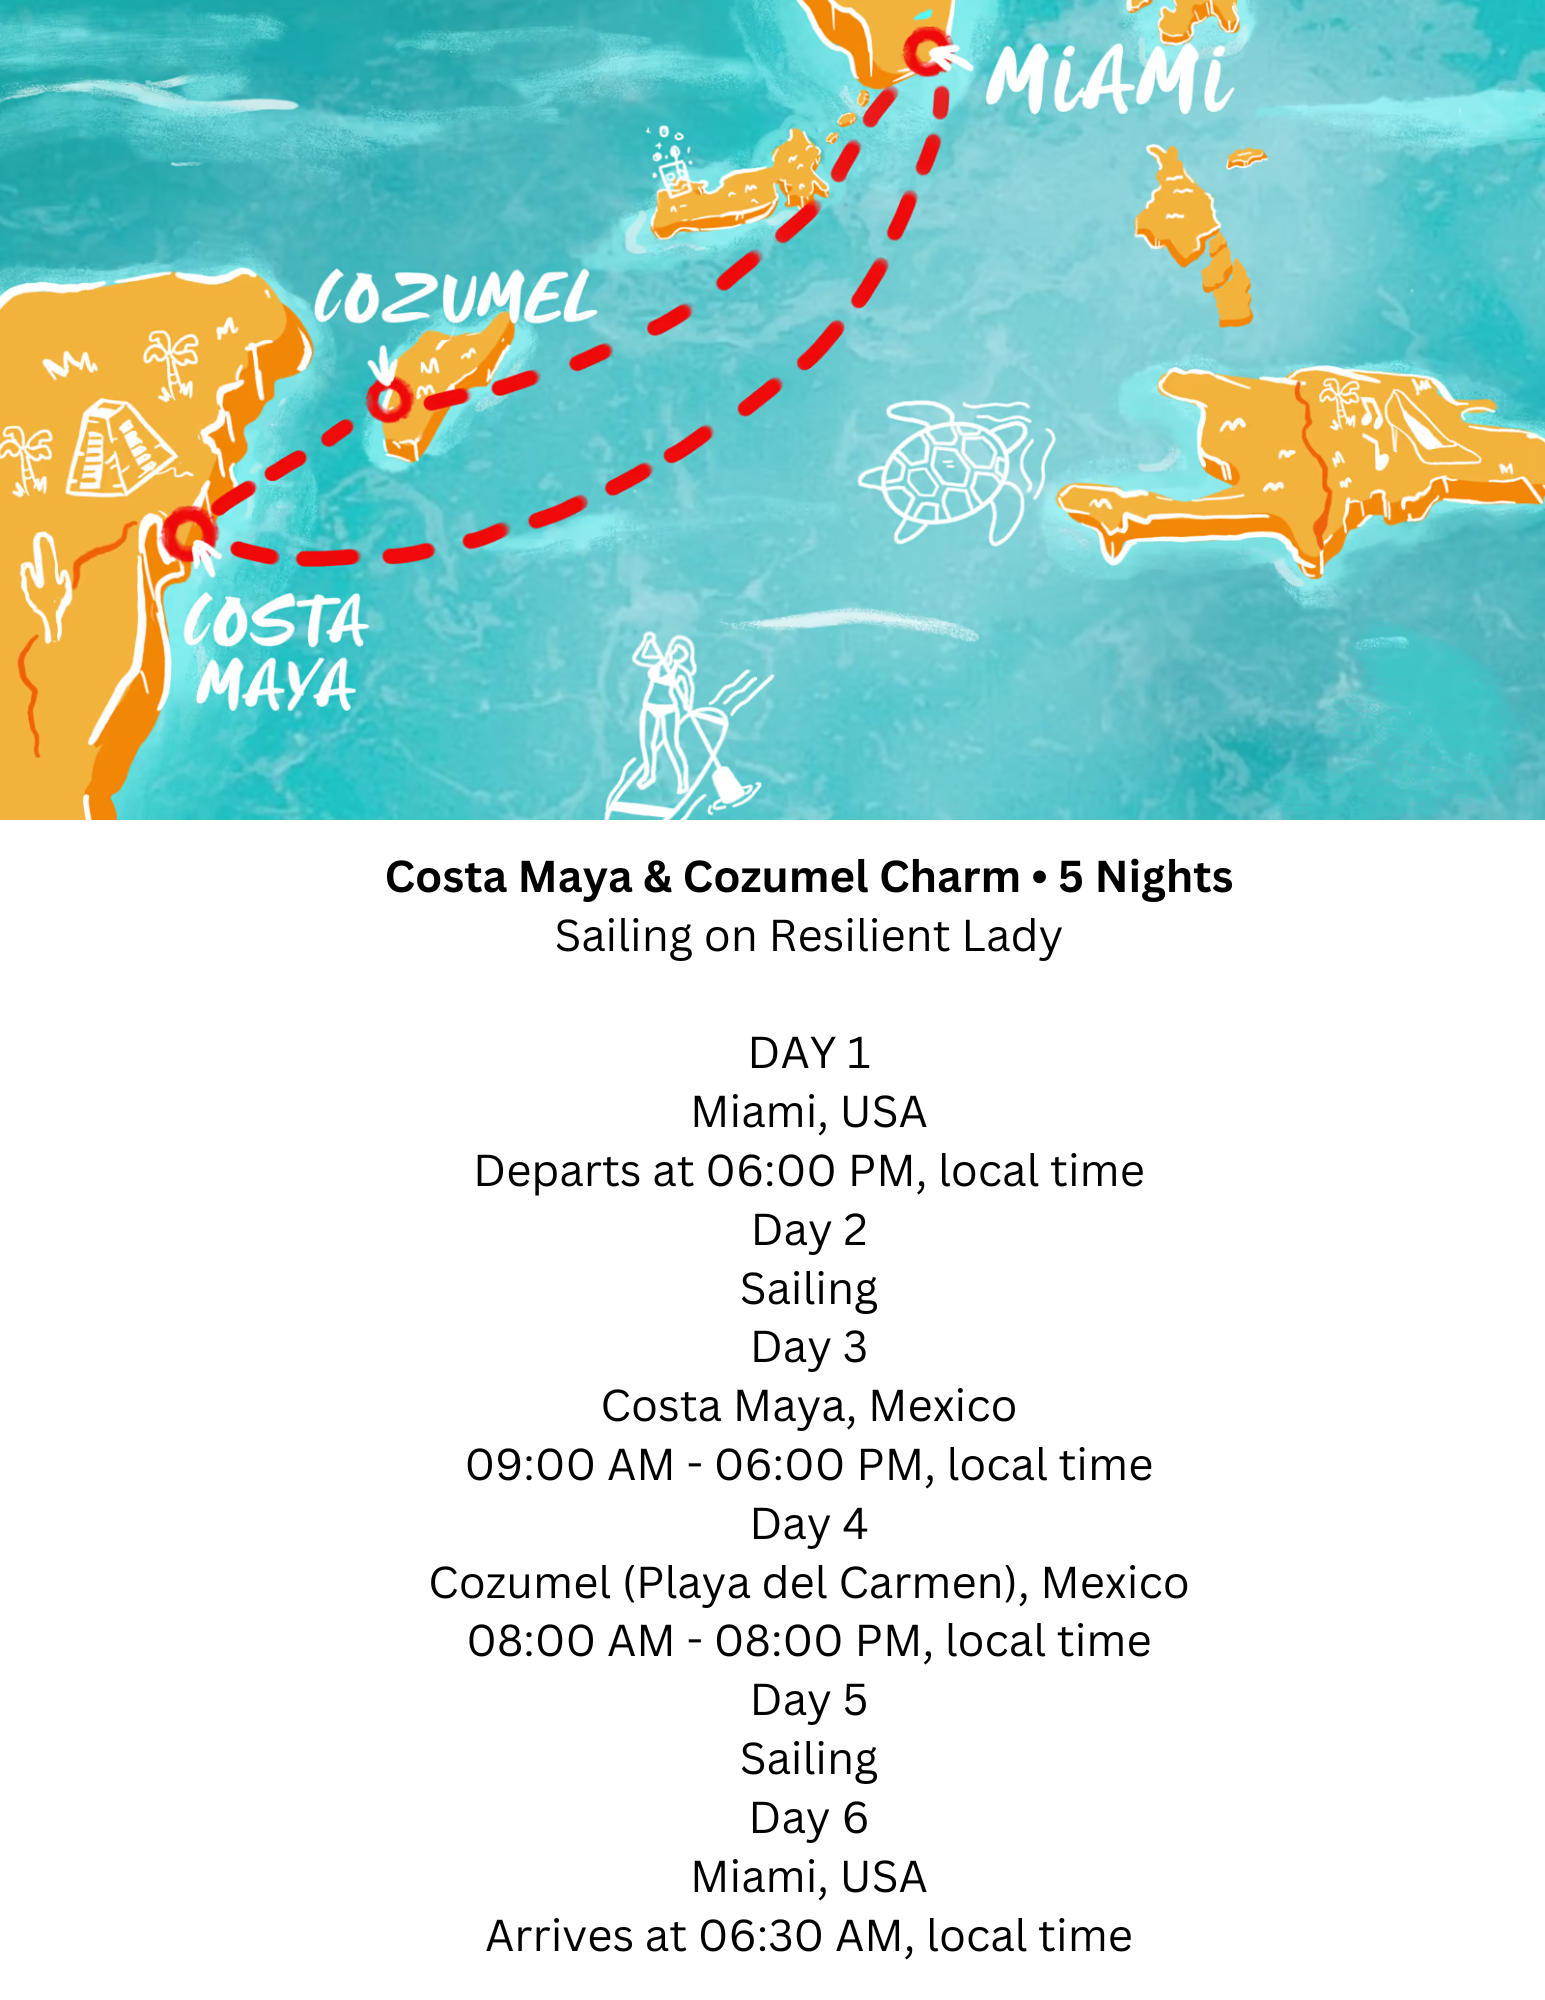 Costa Maya & Cozumel Charm • 5 Nights Sailing on Resilient Lady DAY PORT 1 ItineraryListIcon-img Miami, USA Departs at 0600 PM, local time 📣 All aboard 2 hrs before departure 2 ItineraryListIcon-